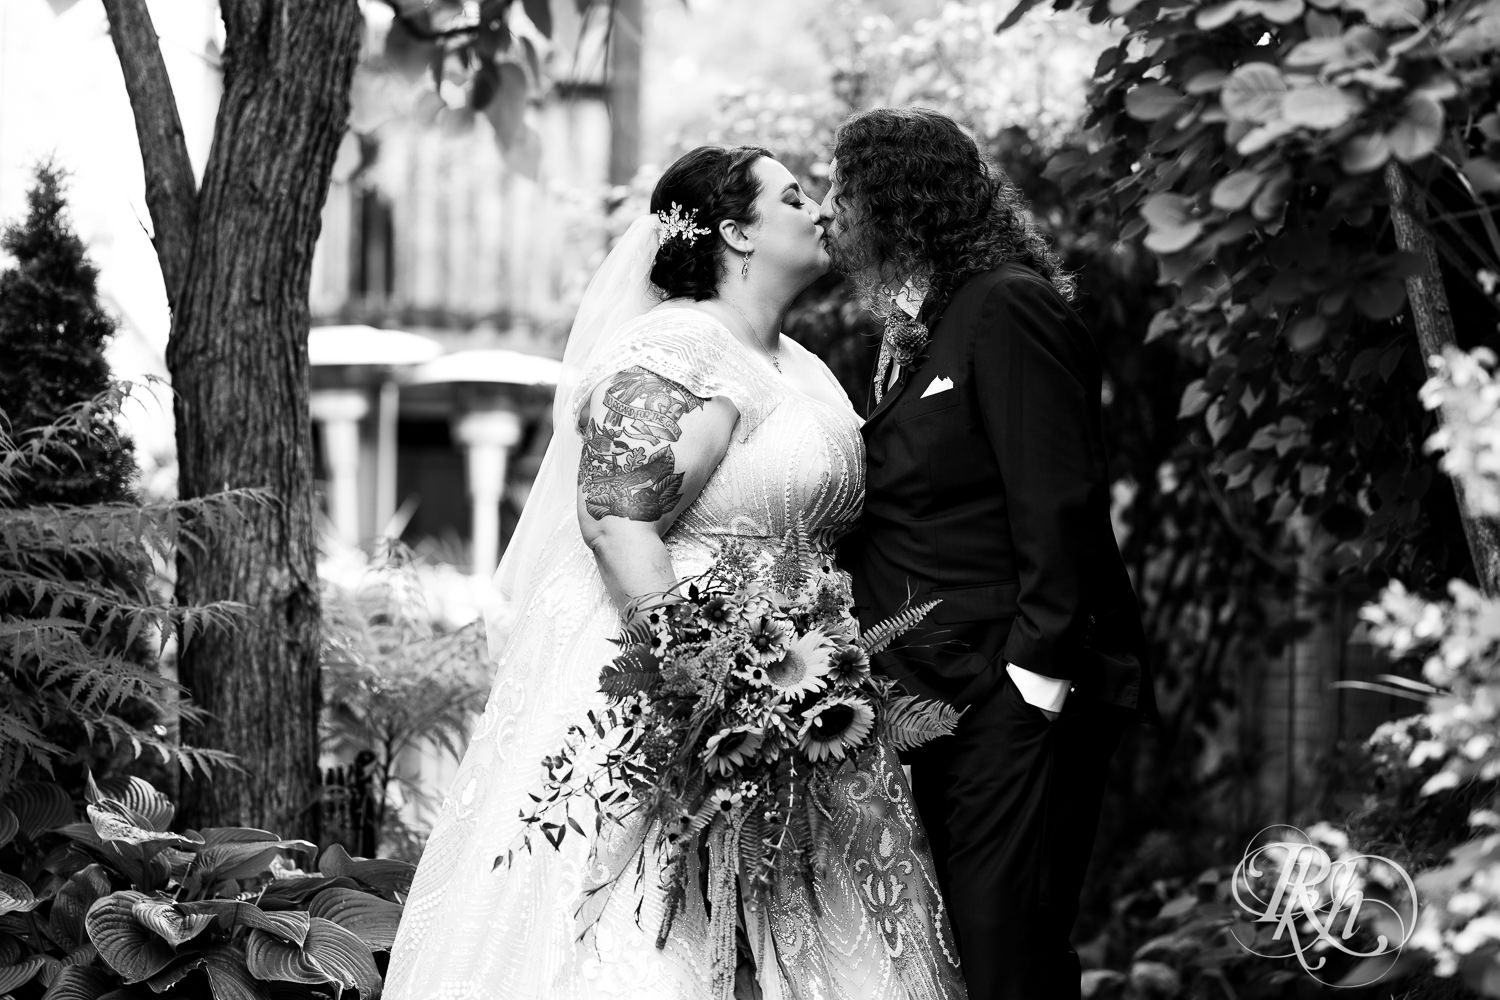 Bride and groom kiss during fall wedding at Kellerman's Event Center in White Bear Lake, Minnesota.